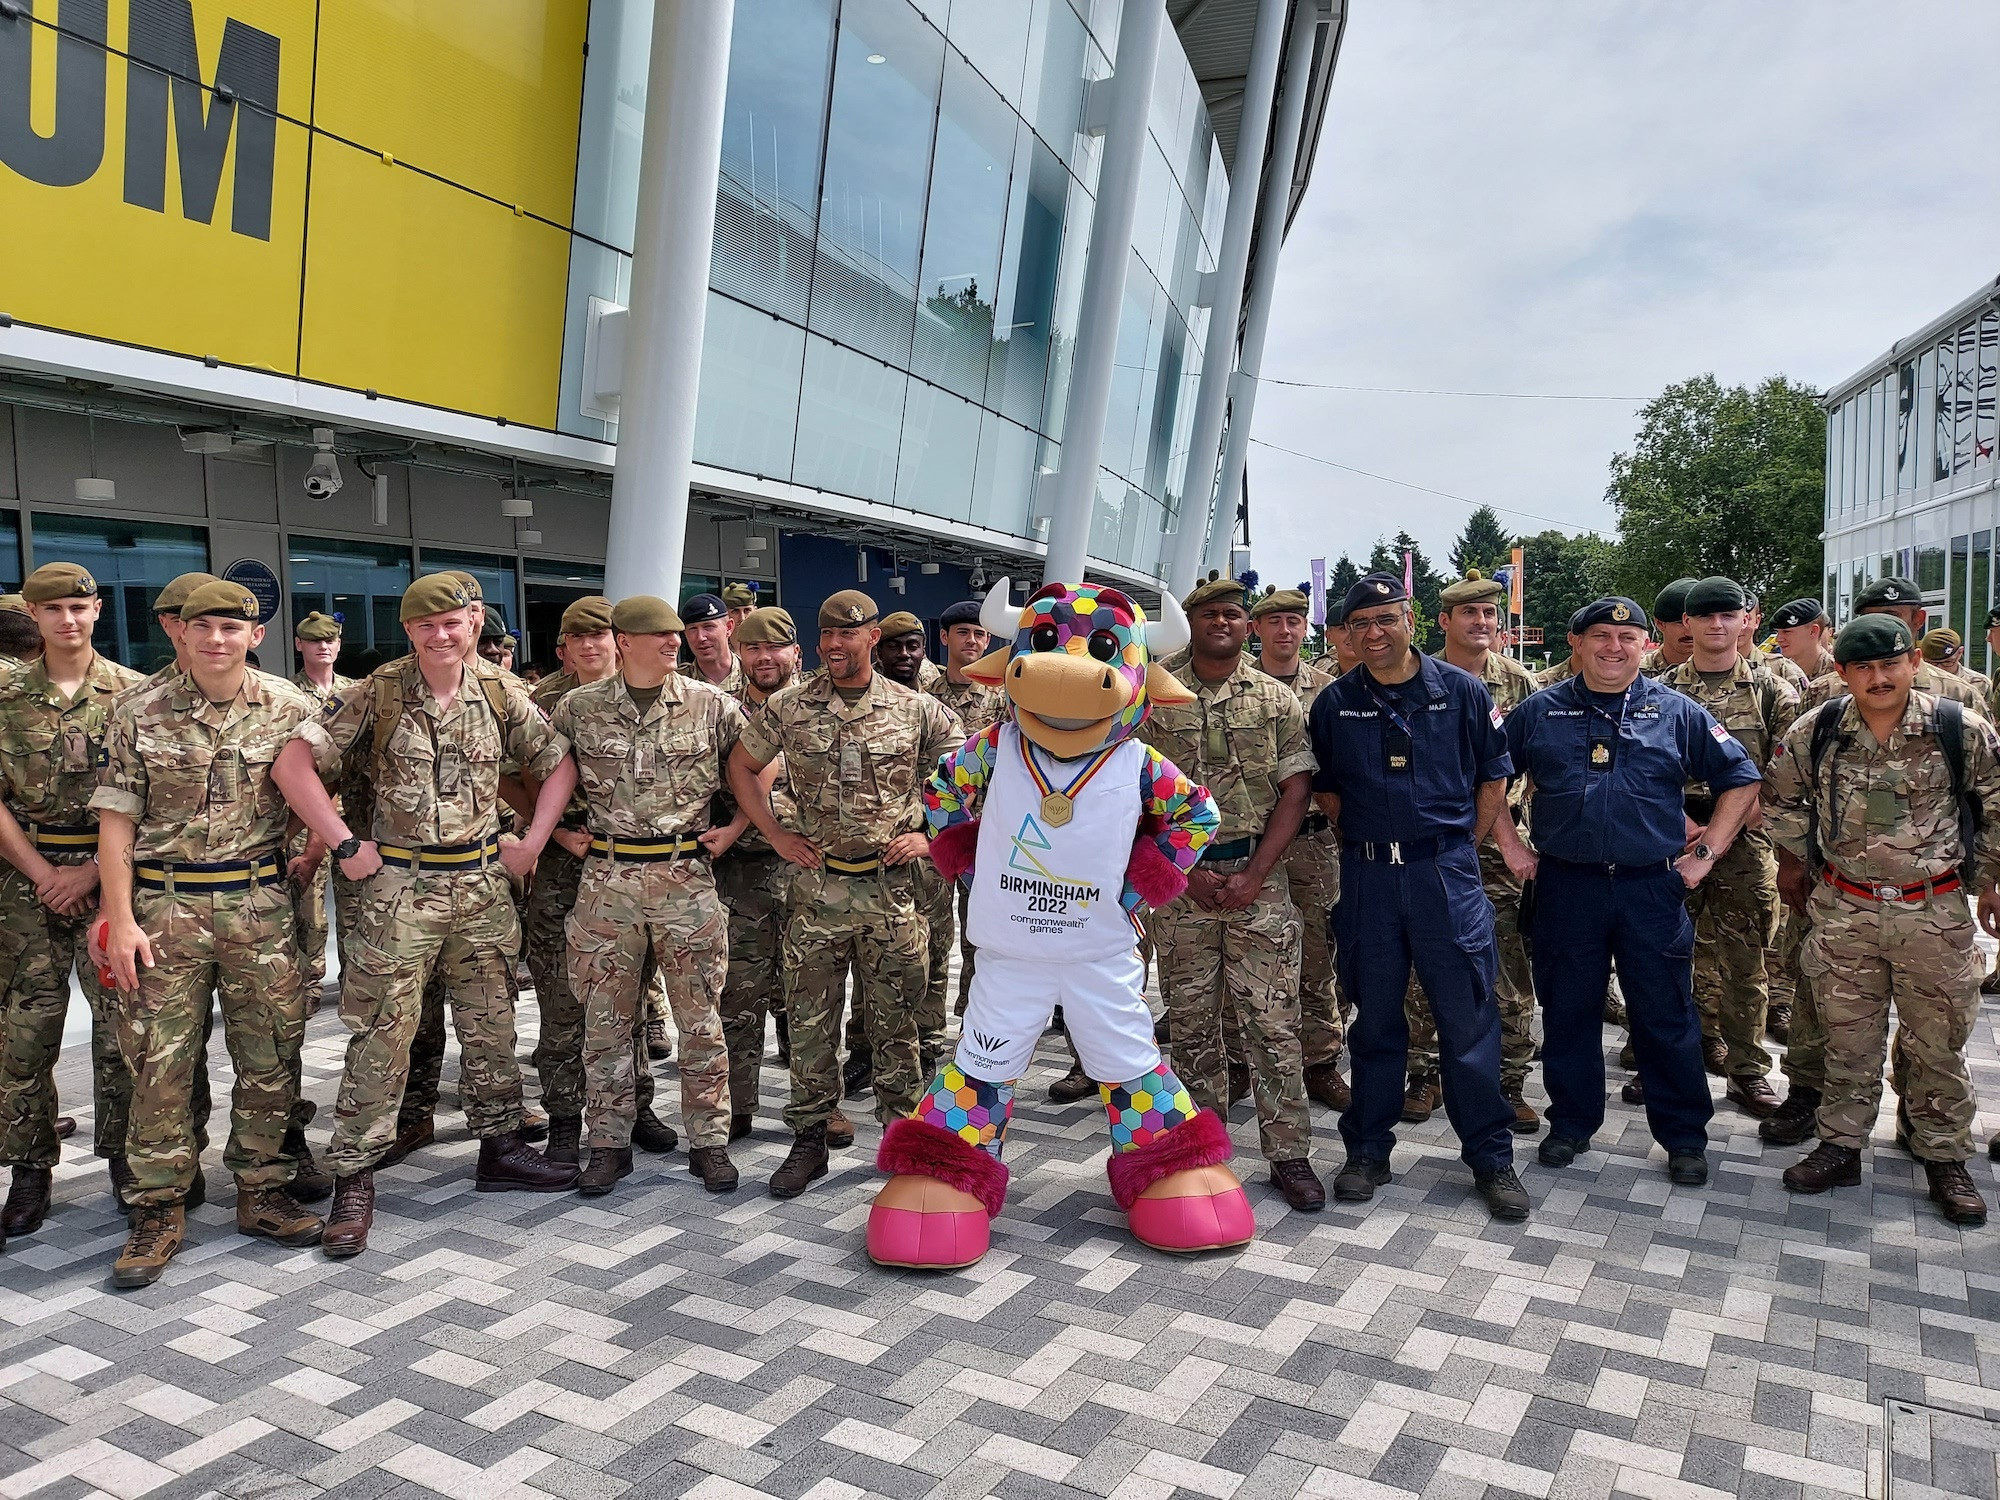 Military personnel deployed to support Birmingham 2022 security operation